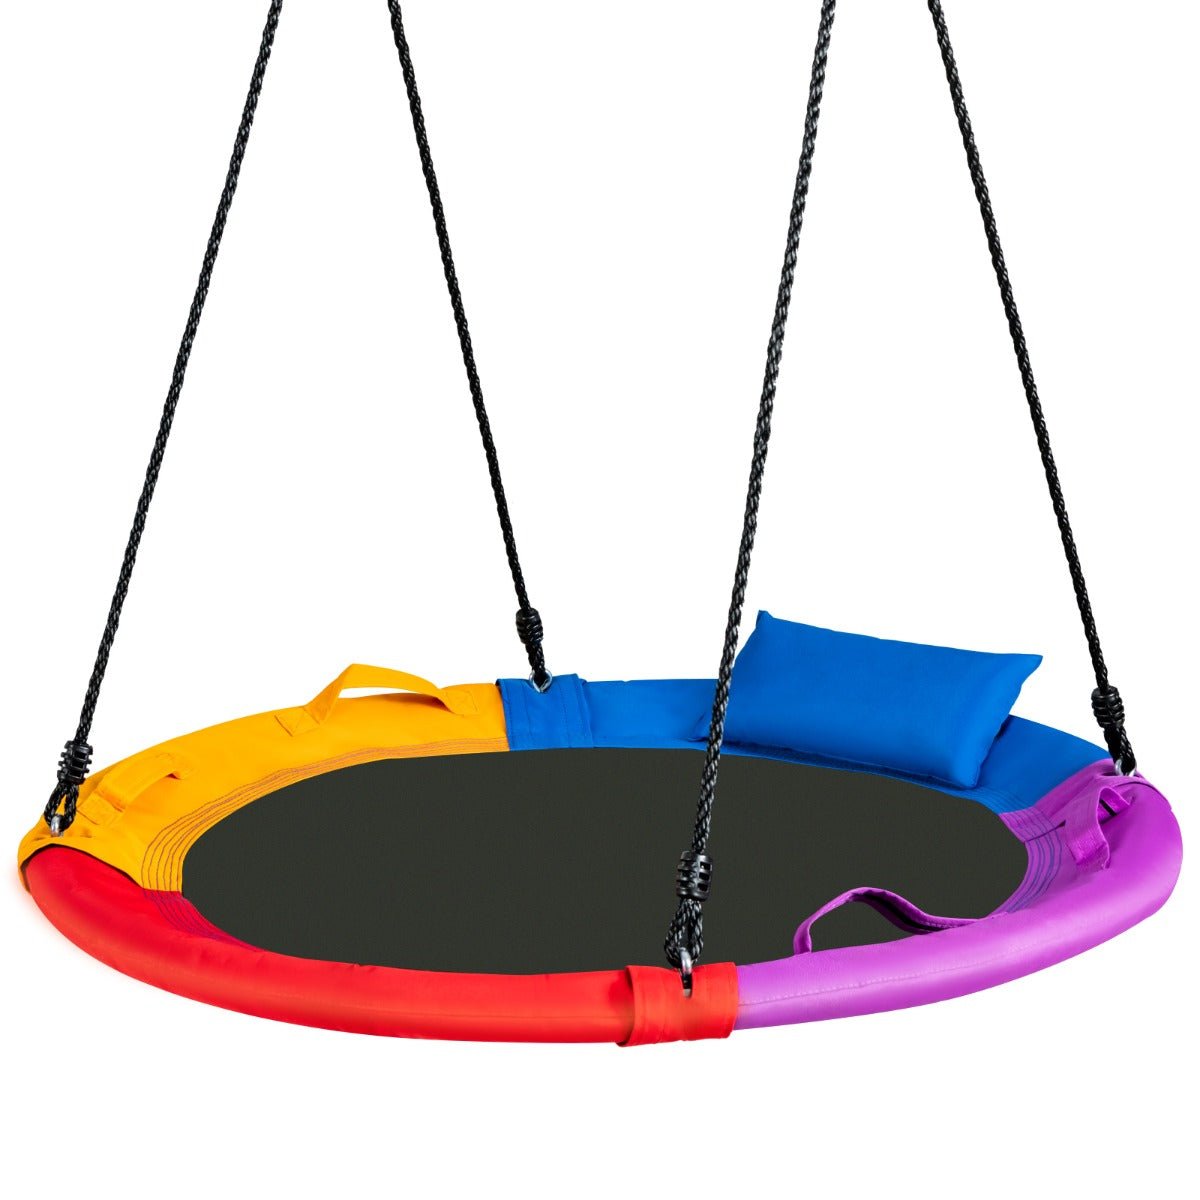 Vibrant Outdoor Saucer Swing: Round Platform Fun for Kids with Pillow